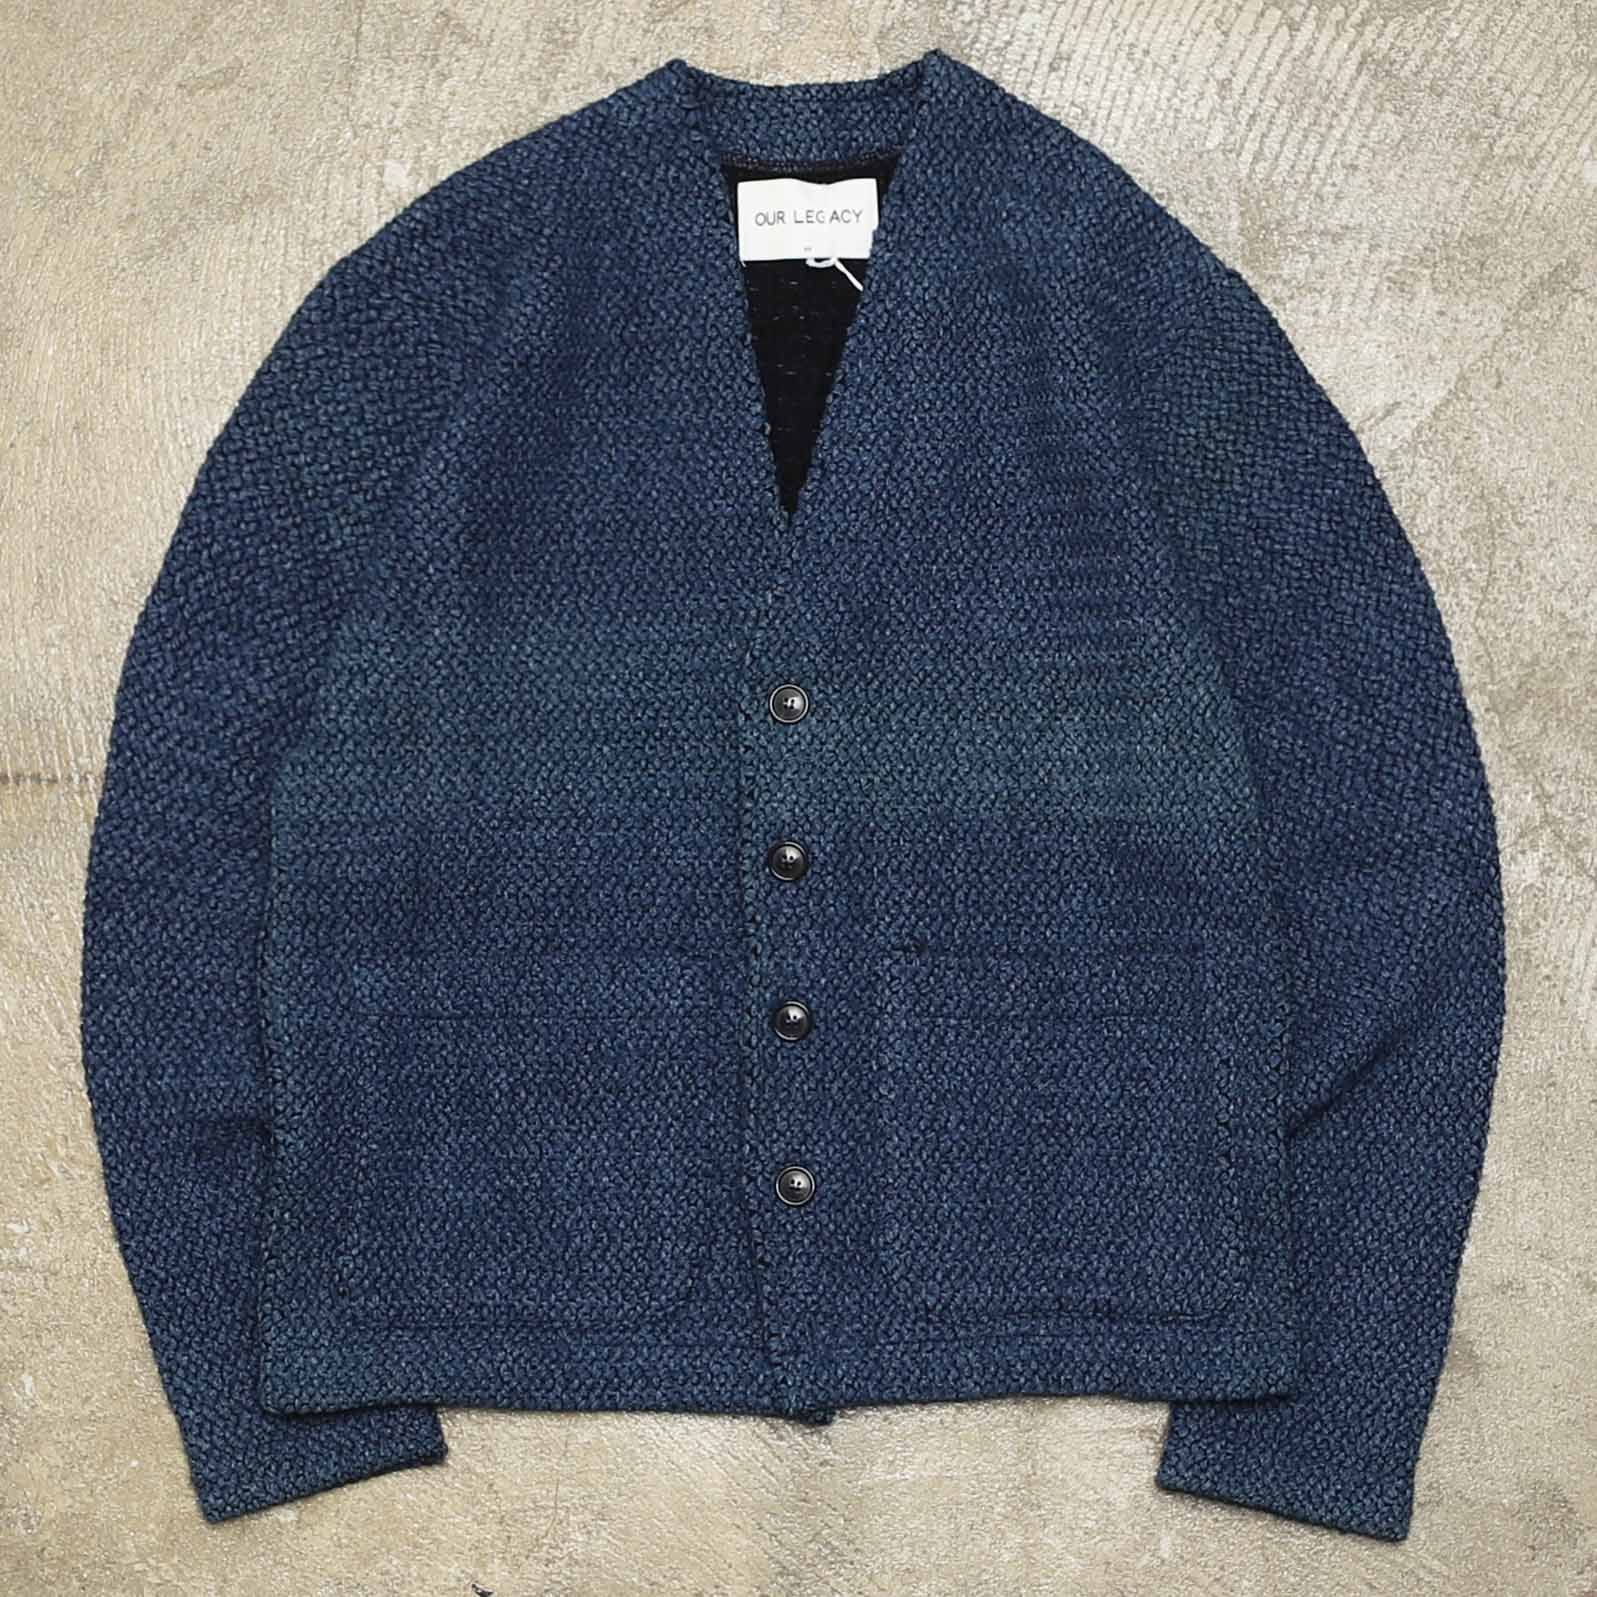 OUR LEGACY HEAVY CT CARDIGAN - BLUE